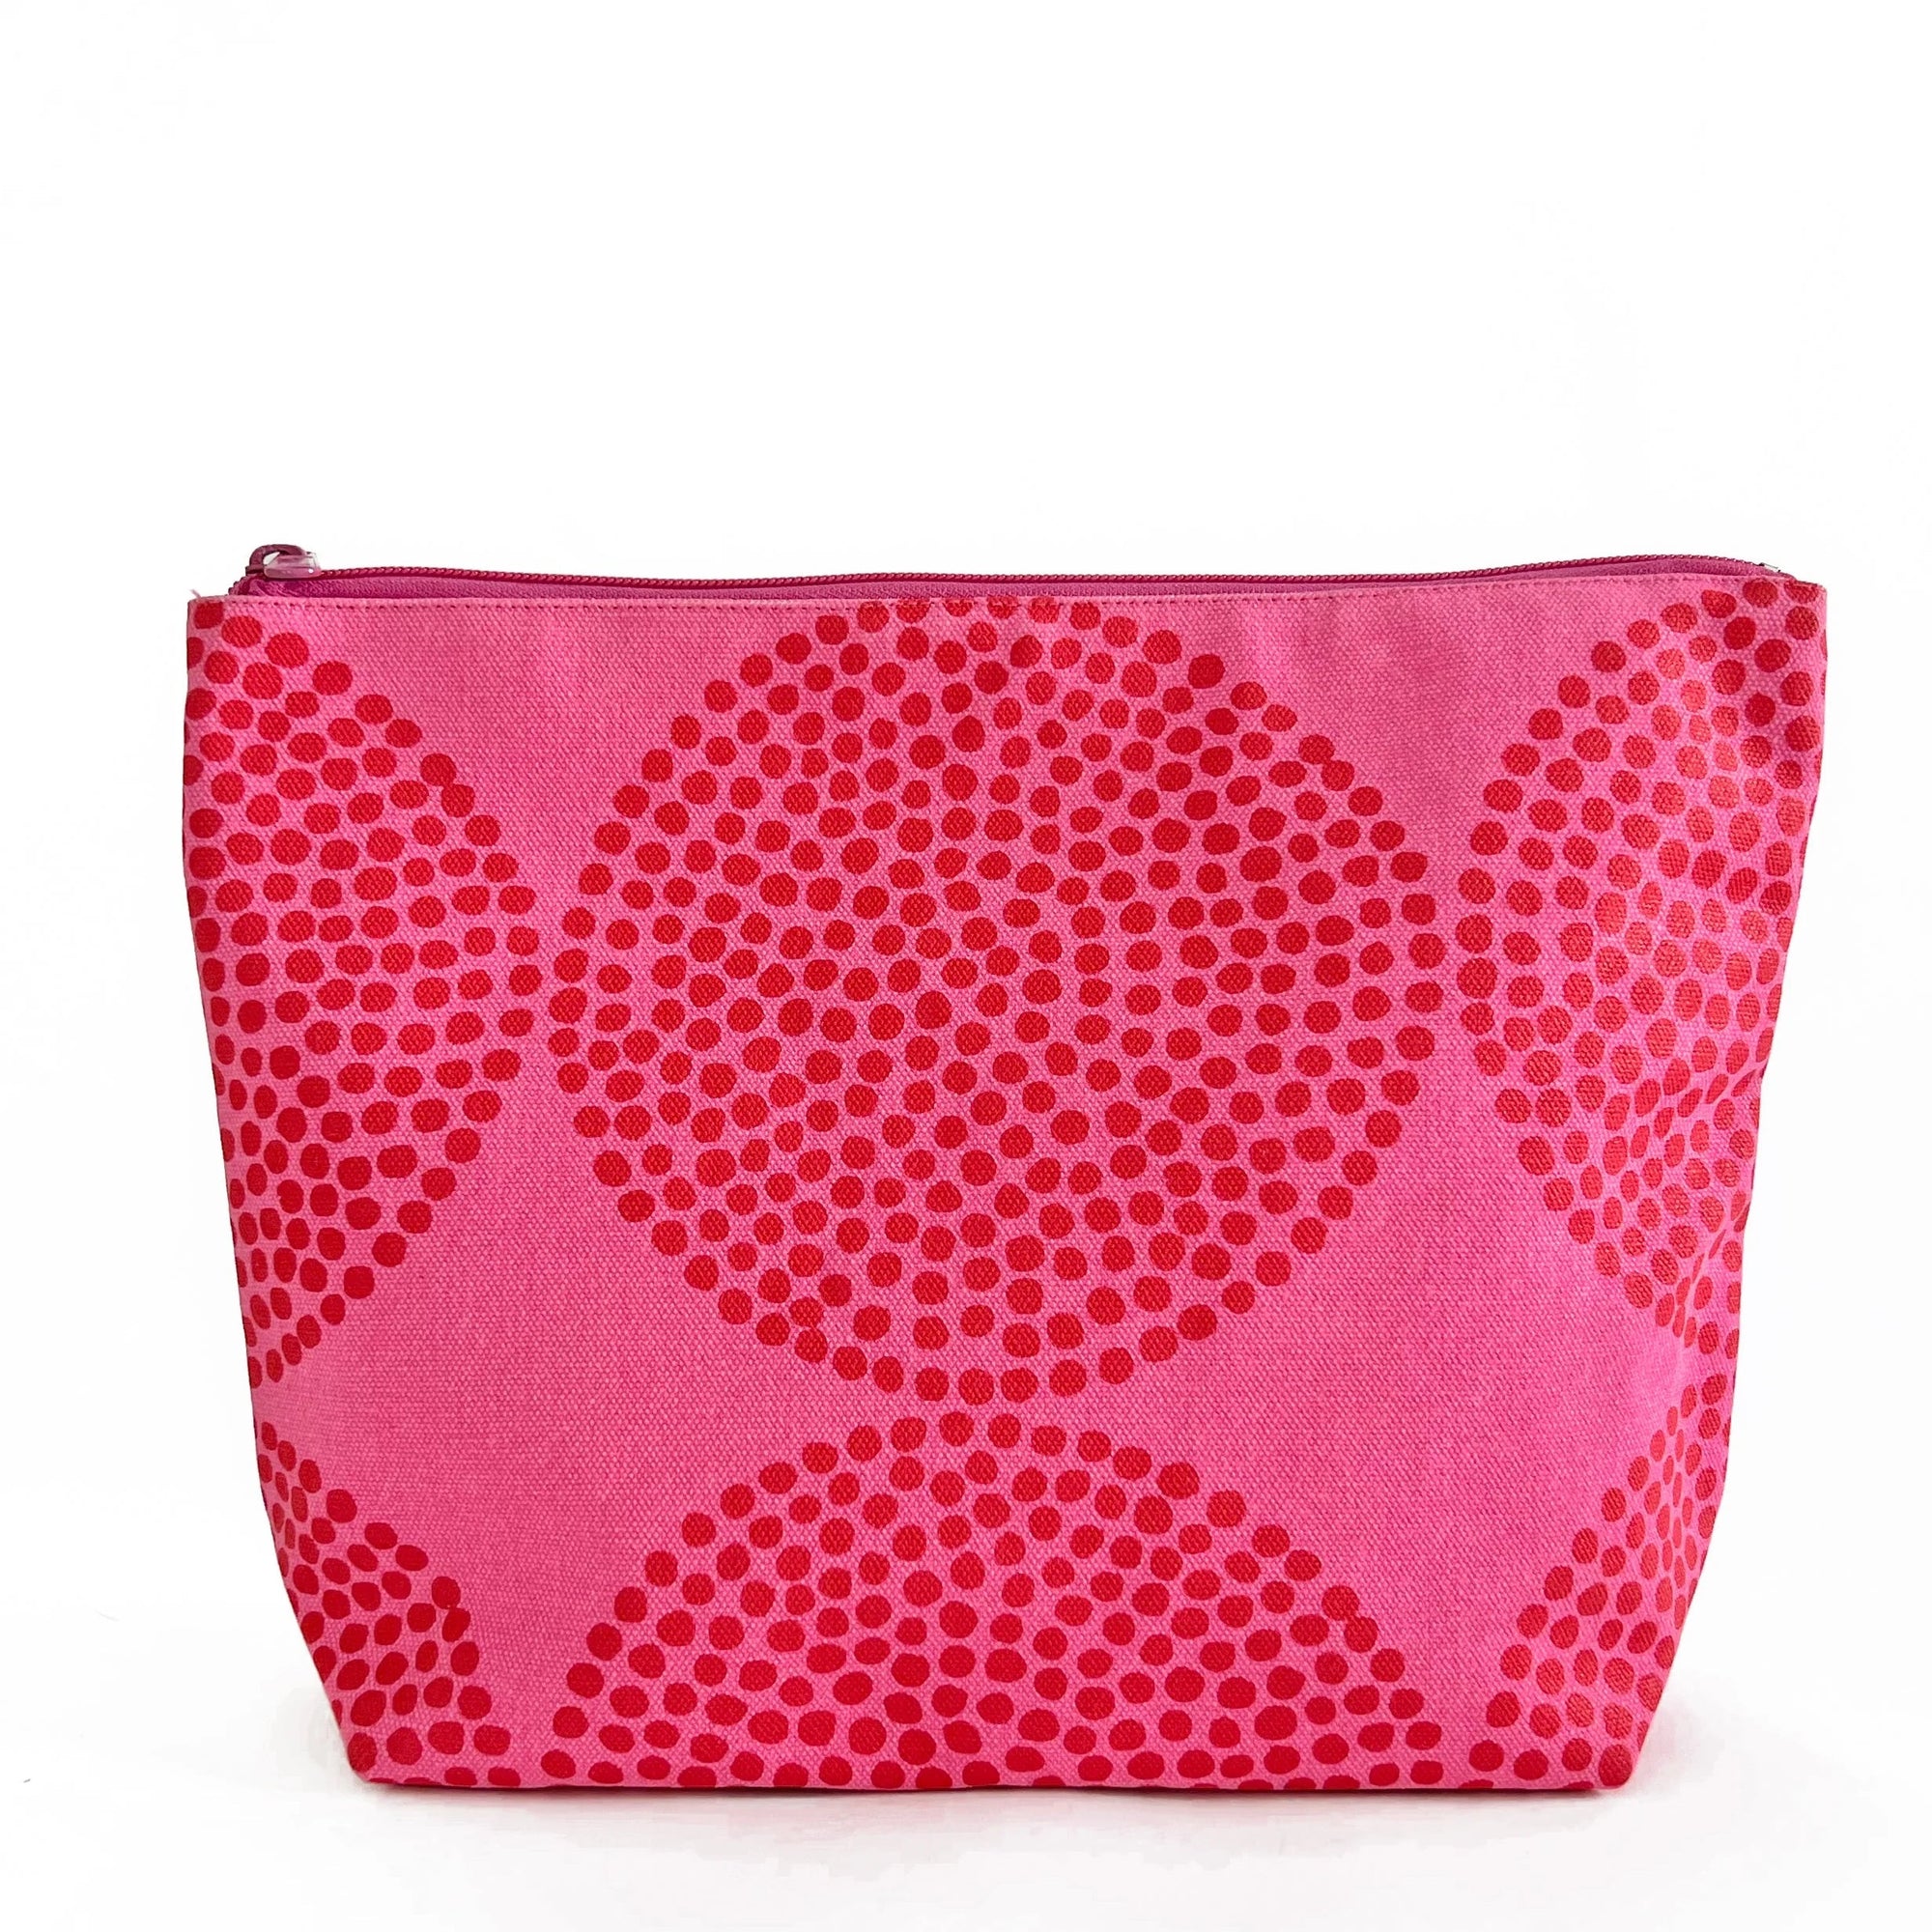 EXTRA LARGE BIG WHEELS TRAVEL POUCH - PINK/RED-Case-SEE DESIGN-Coriander